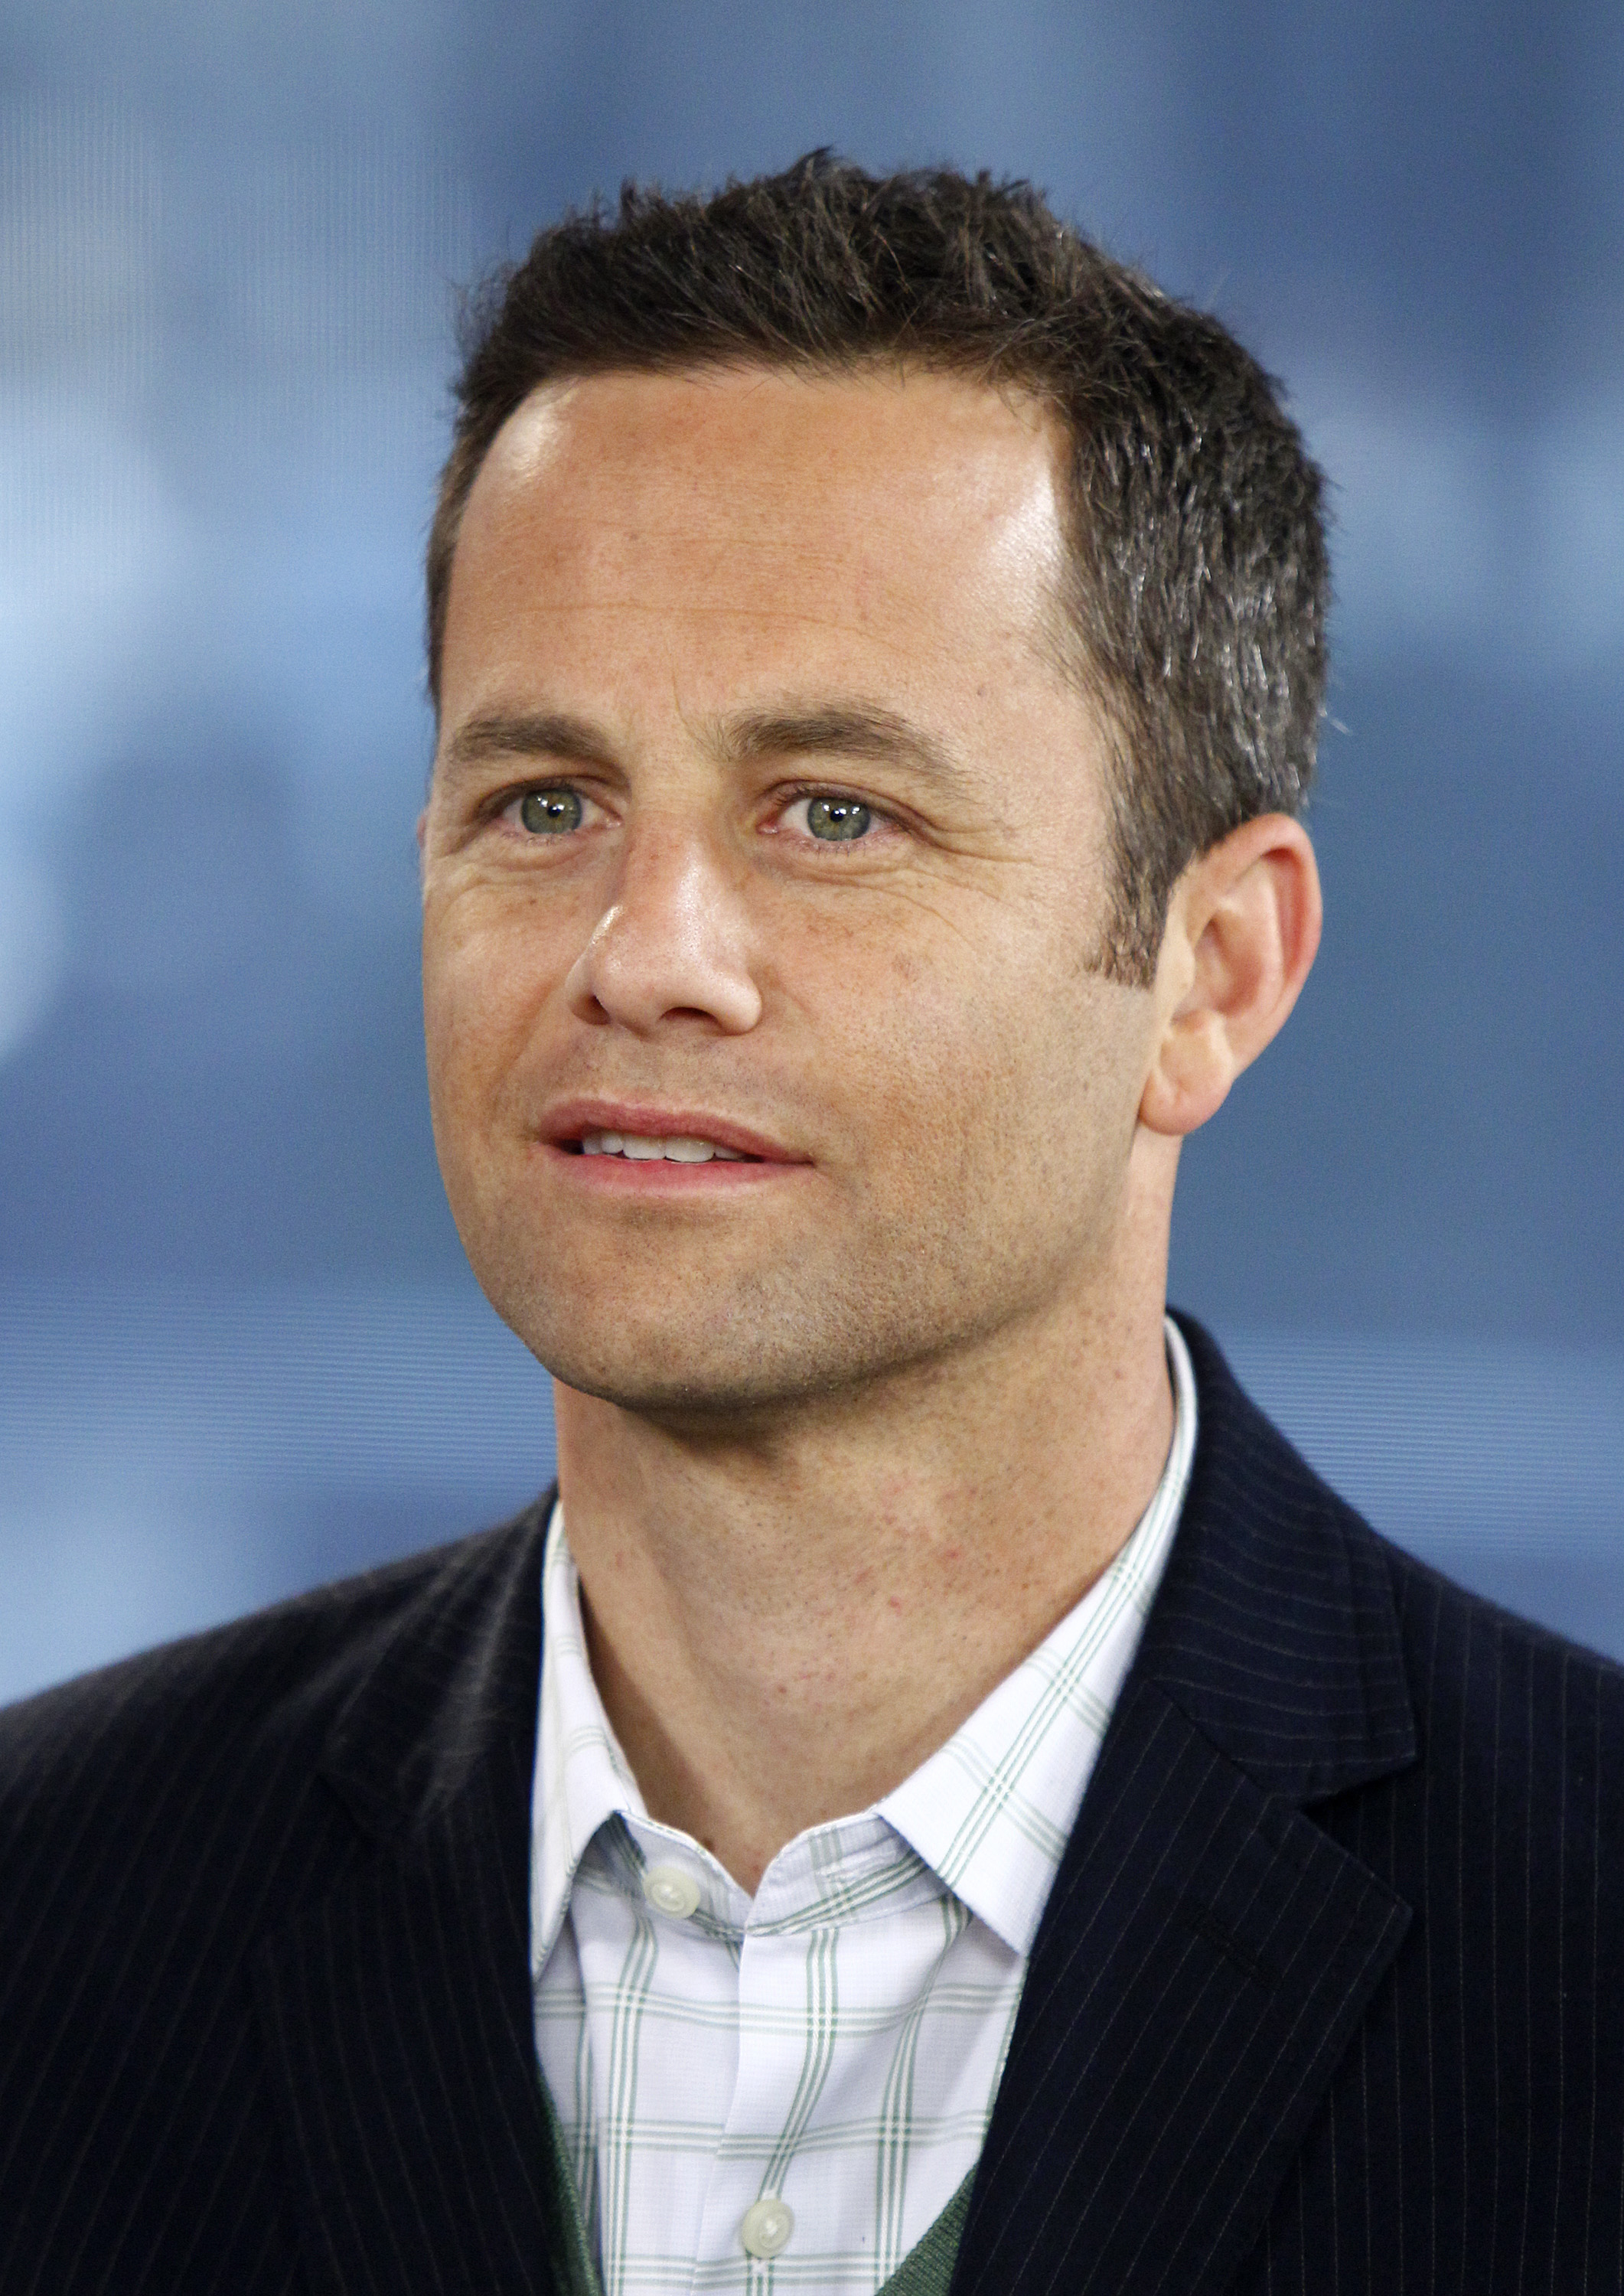 Kirk Cameron appears on NBC News' "Today" show. (NBC NewsWire&mdash;NBCU Photo Bank via Getty Images)